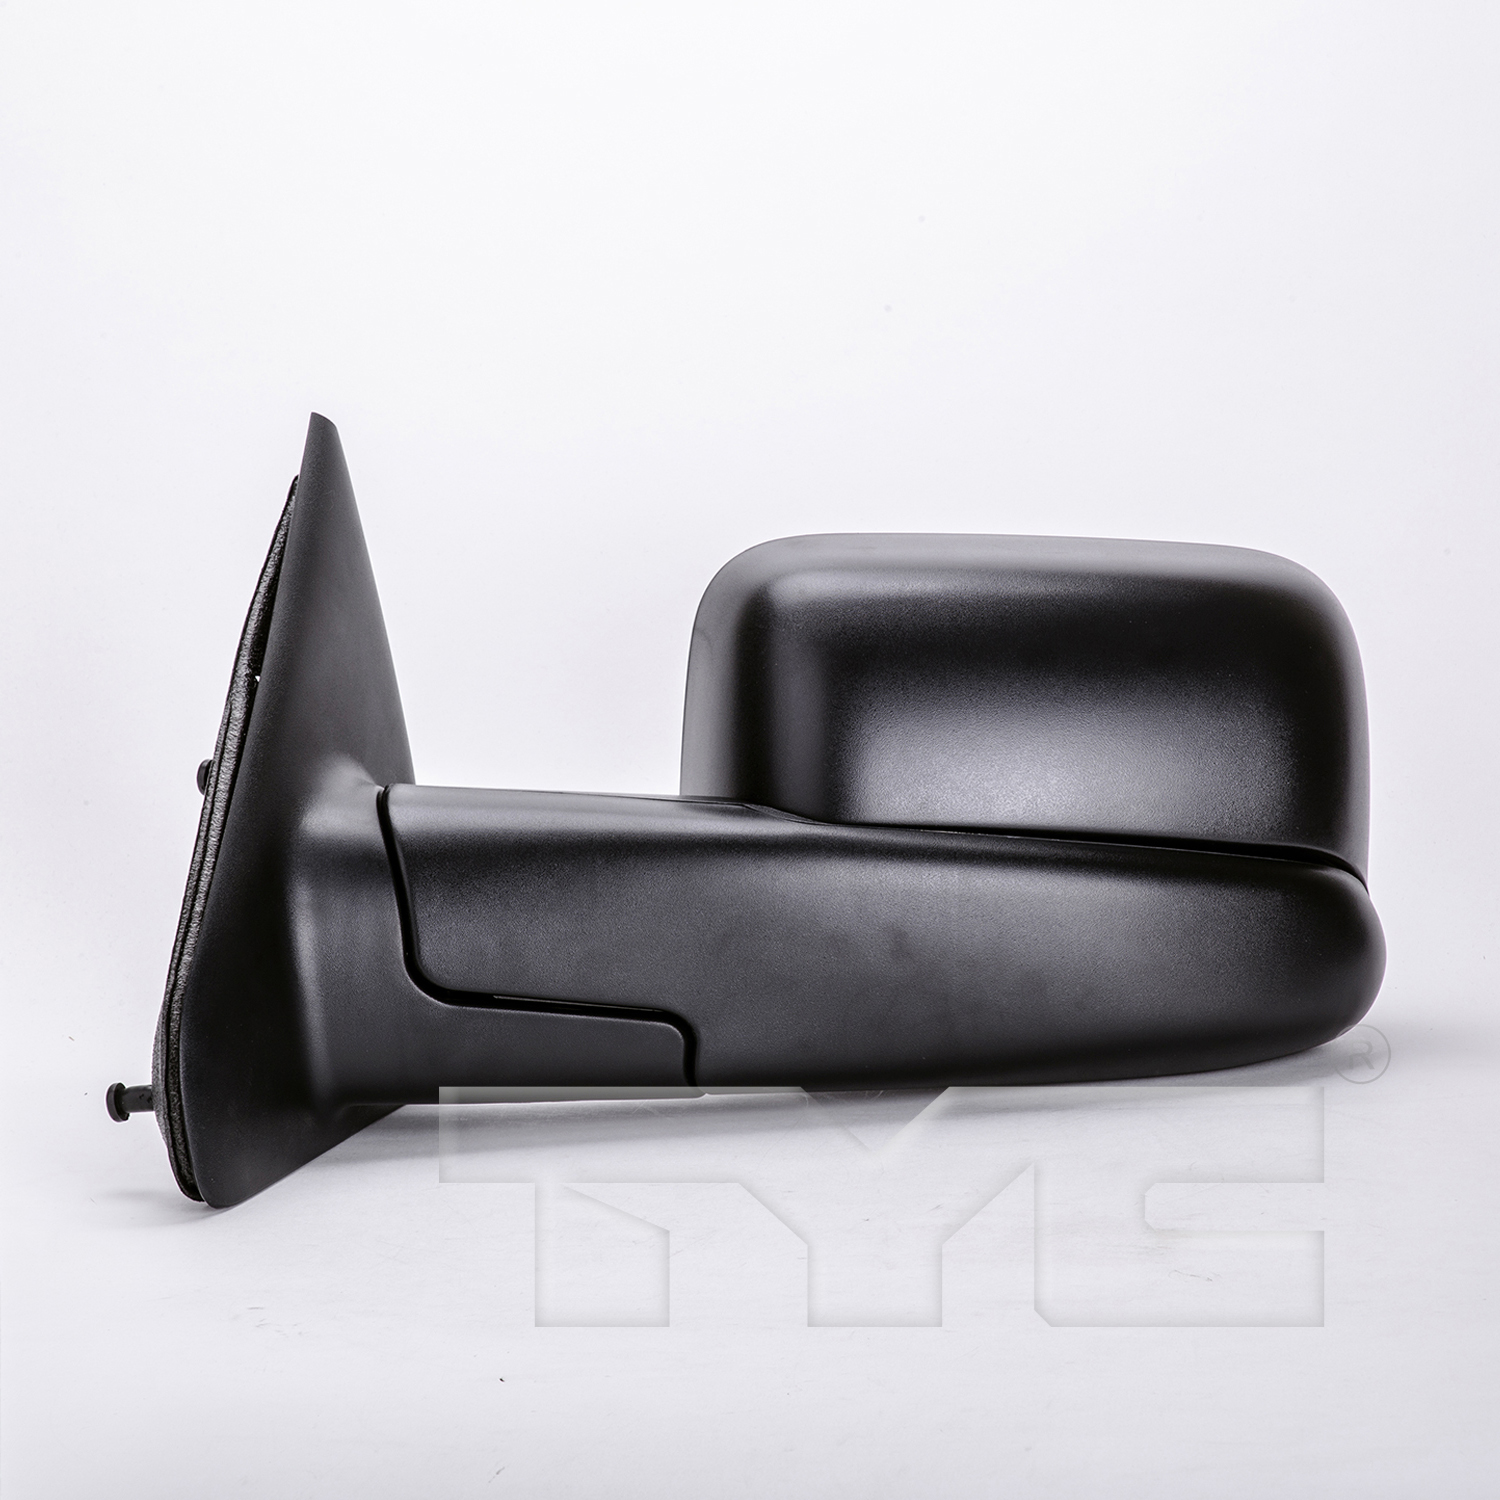 Aftermarket MIRRORS for DODGE - RAM 3500, RAM 3500,05-09,LT Mirror outside rear view